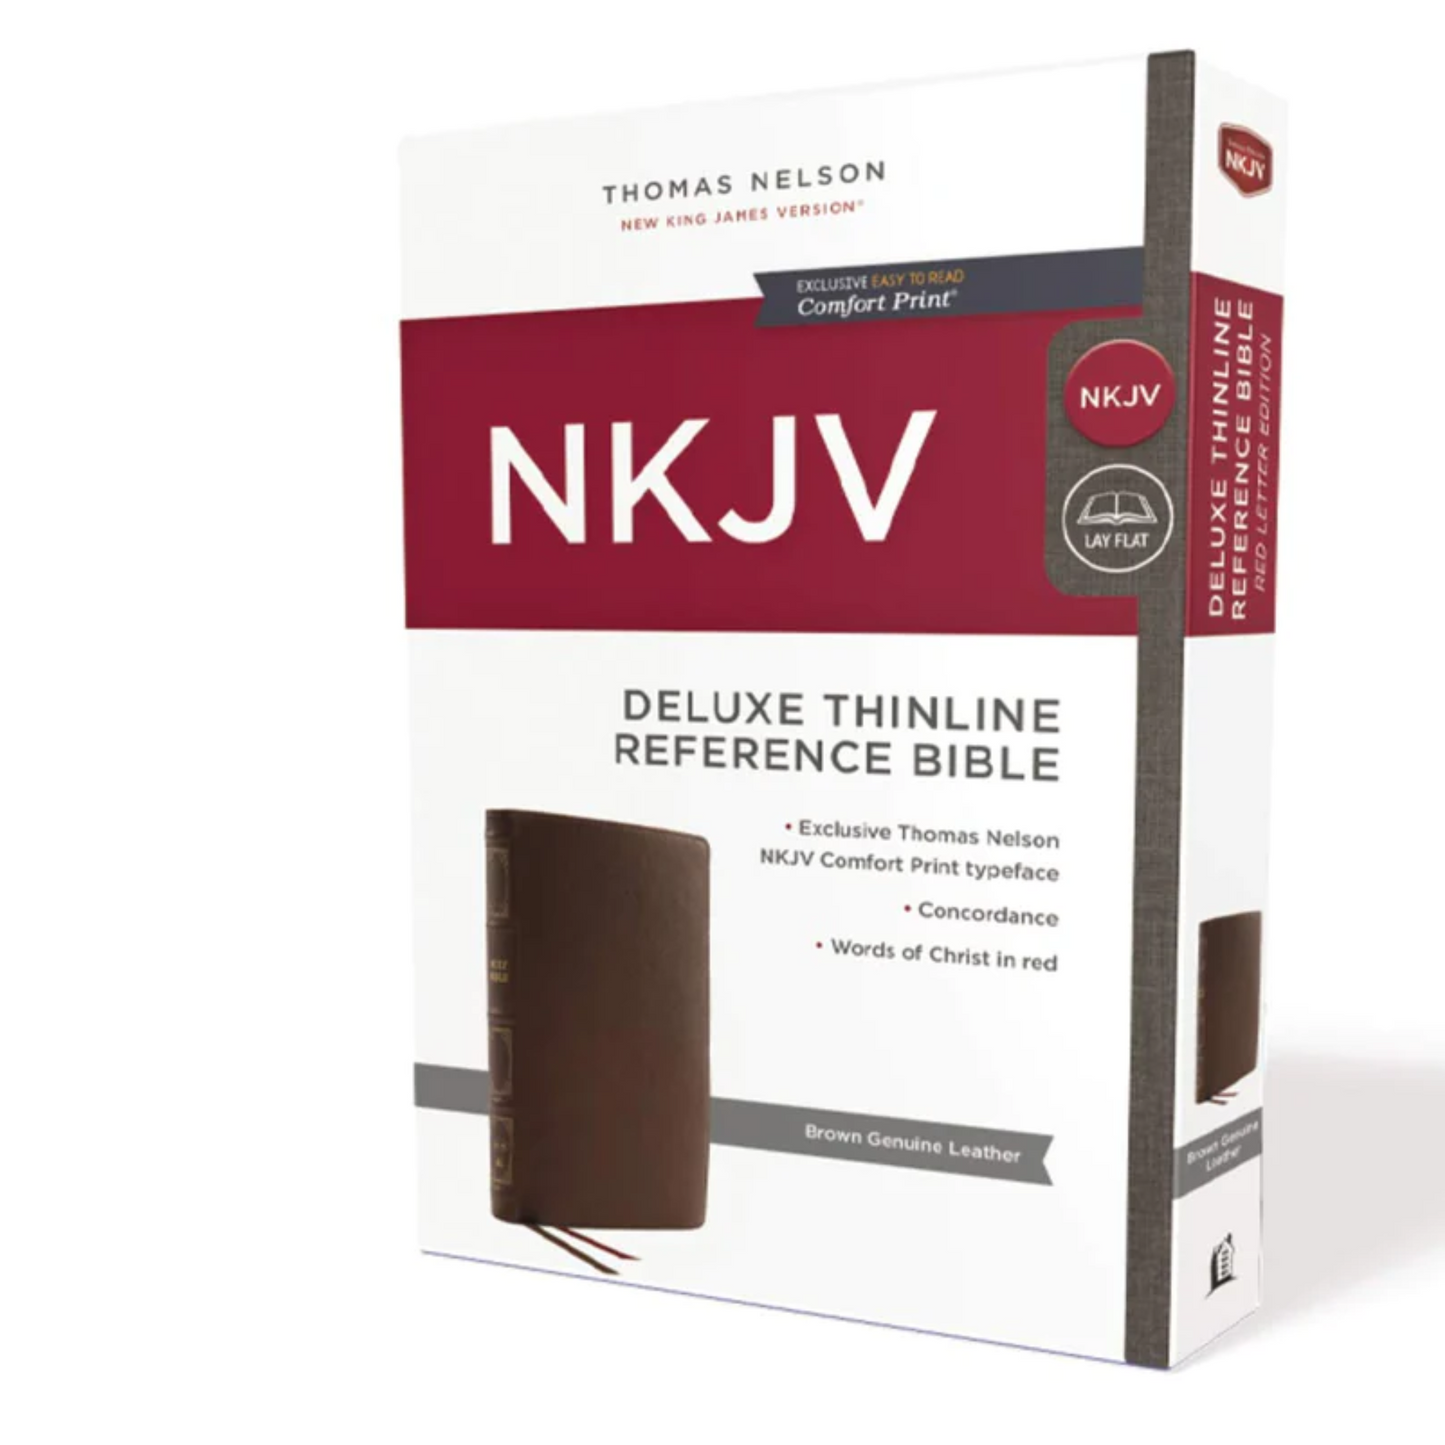 NKJV, Thinline Reference Bible, Genuine Leather, Brown